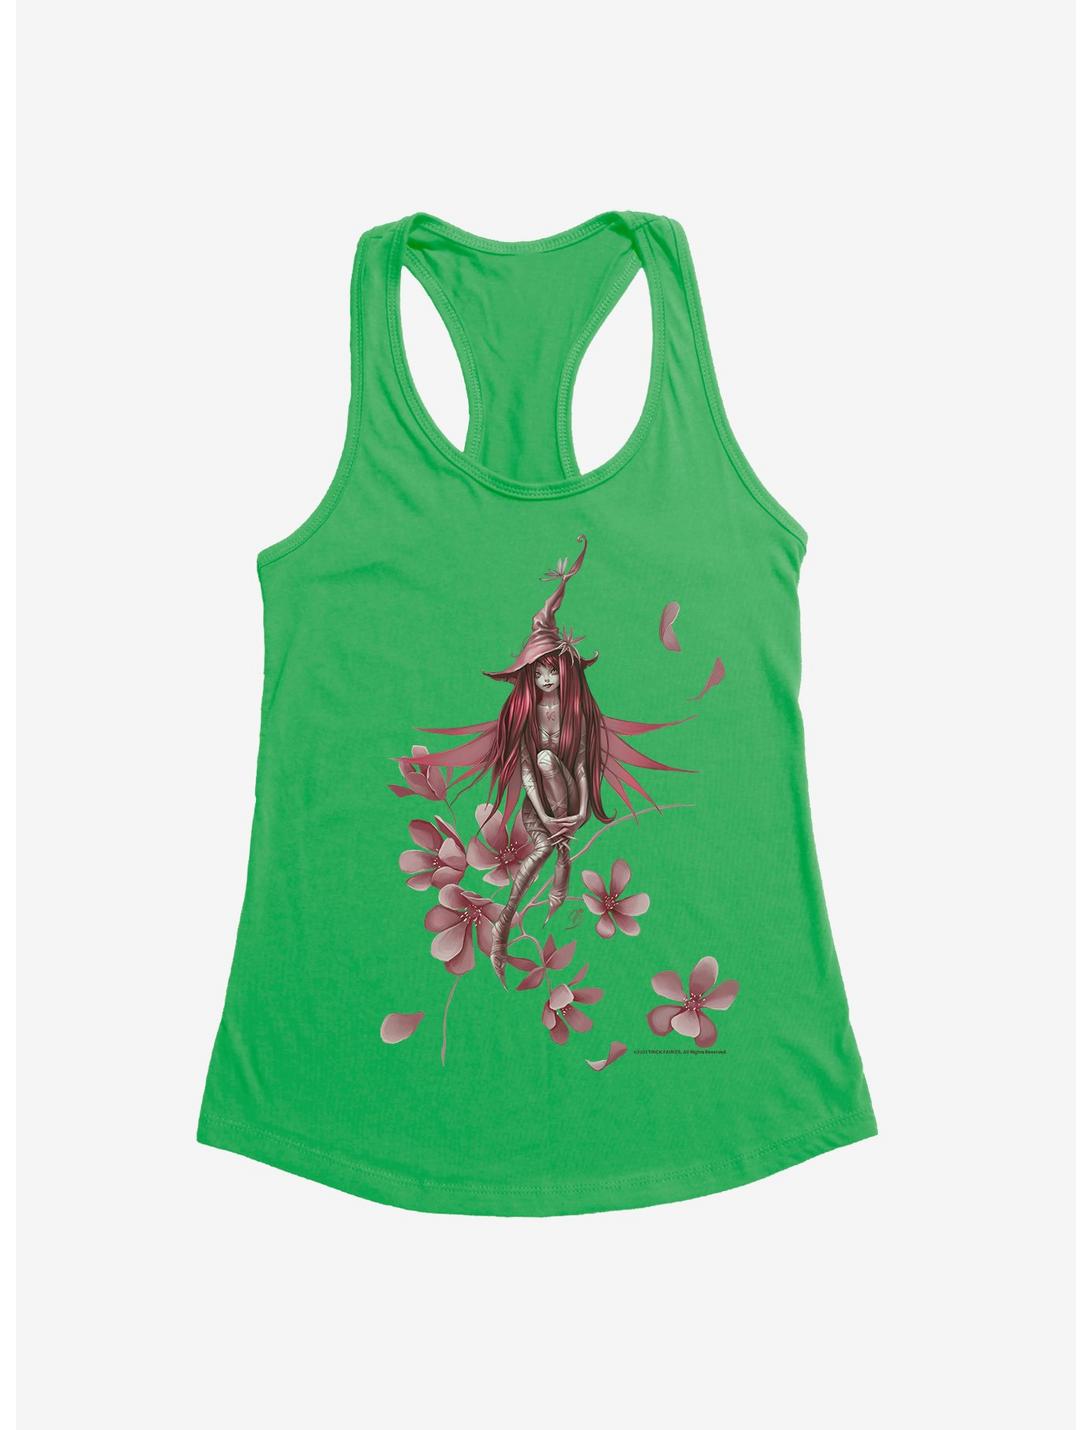 Fairies By Trick Blooming Fairy Girls Tank, , hi-res